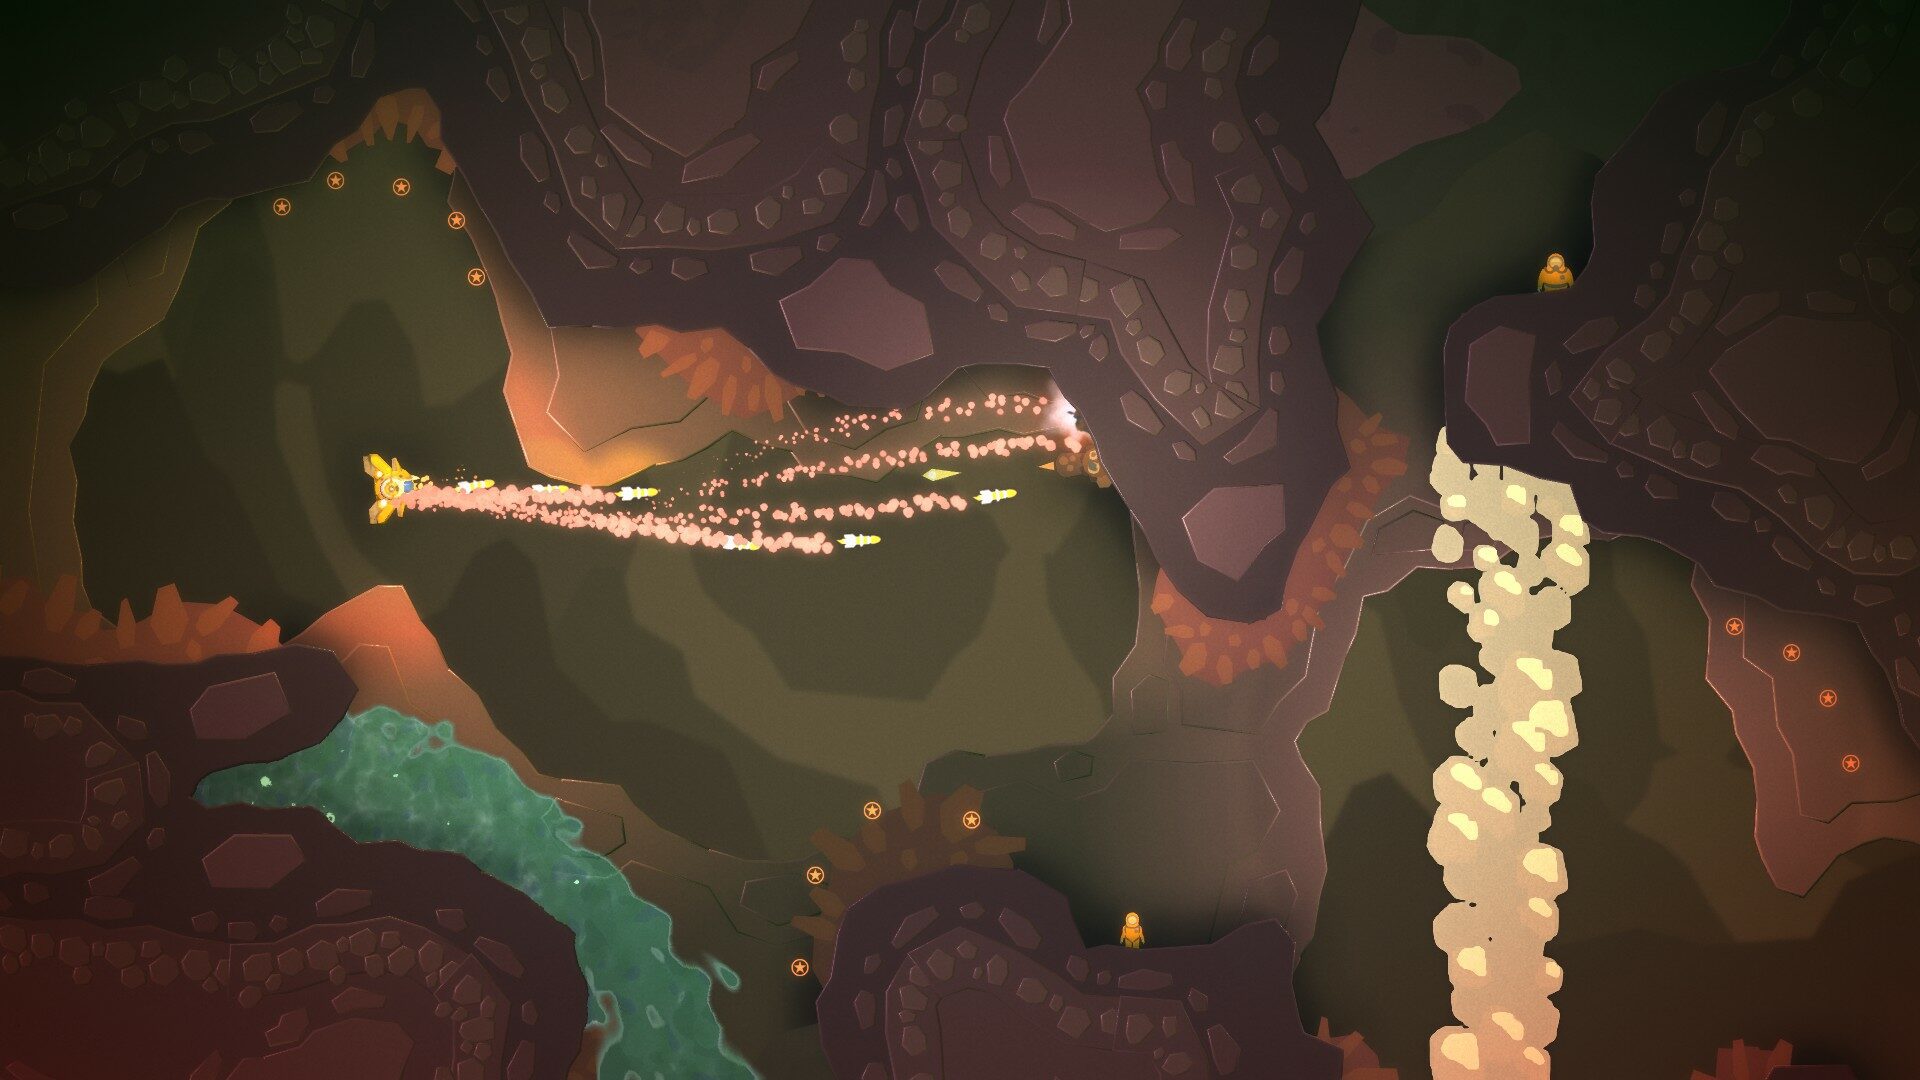 Missed Out On PixelJunk Shooter Ultimate Because It Wasn’t On PC? Help Is On The Way!